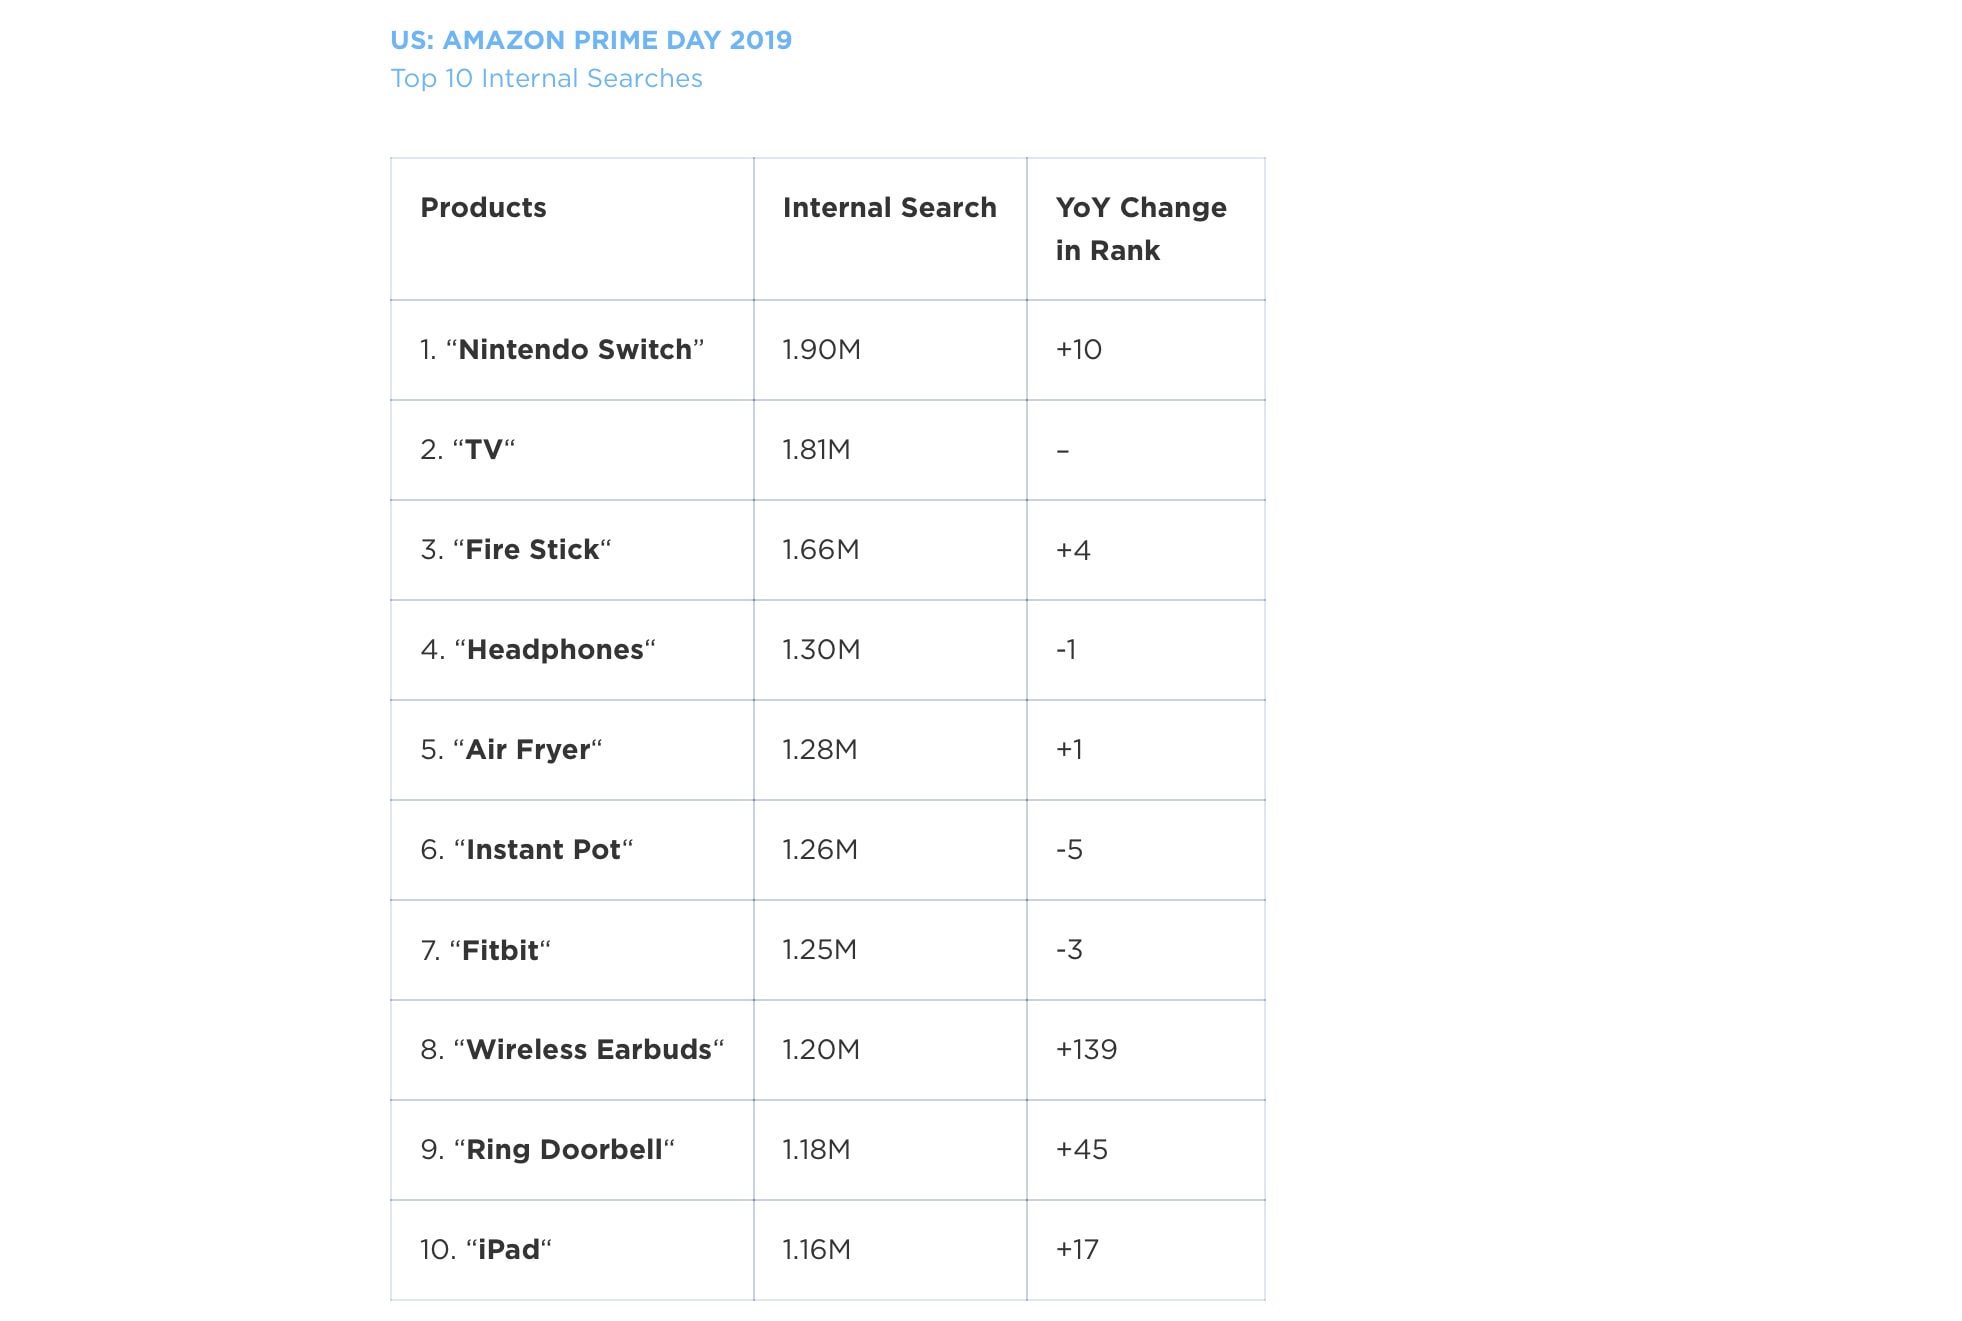 Apple products made a poor showing when it comes to Prime Day searches in 2019.